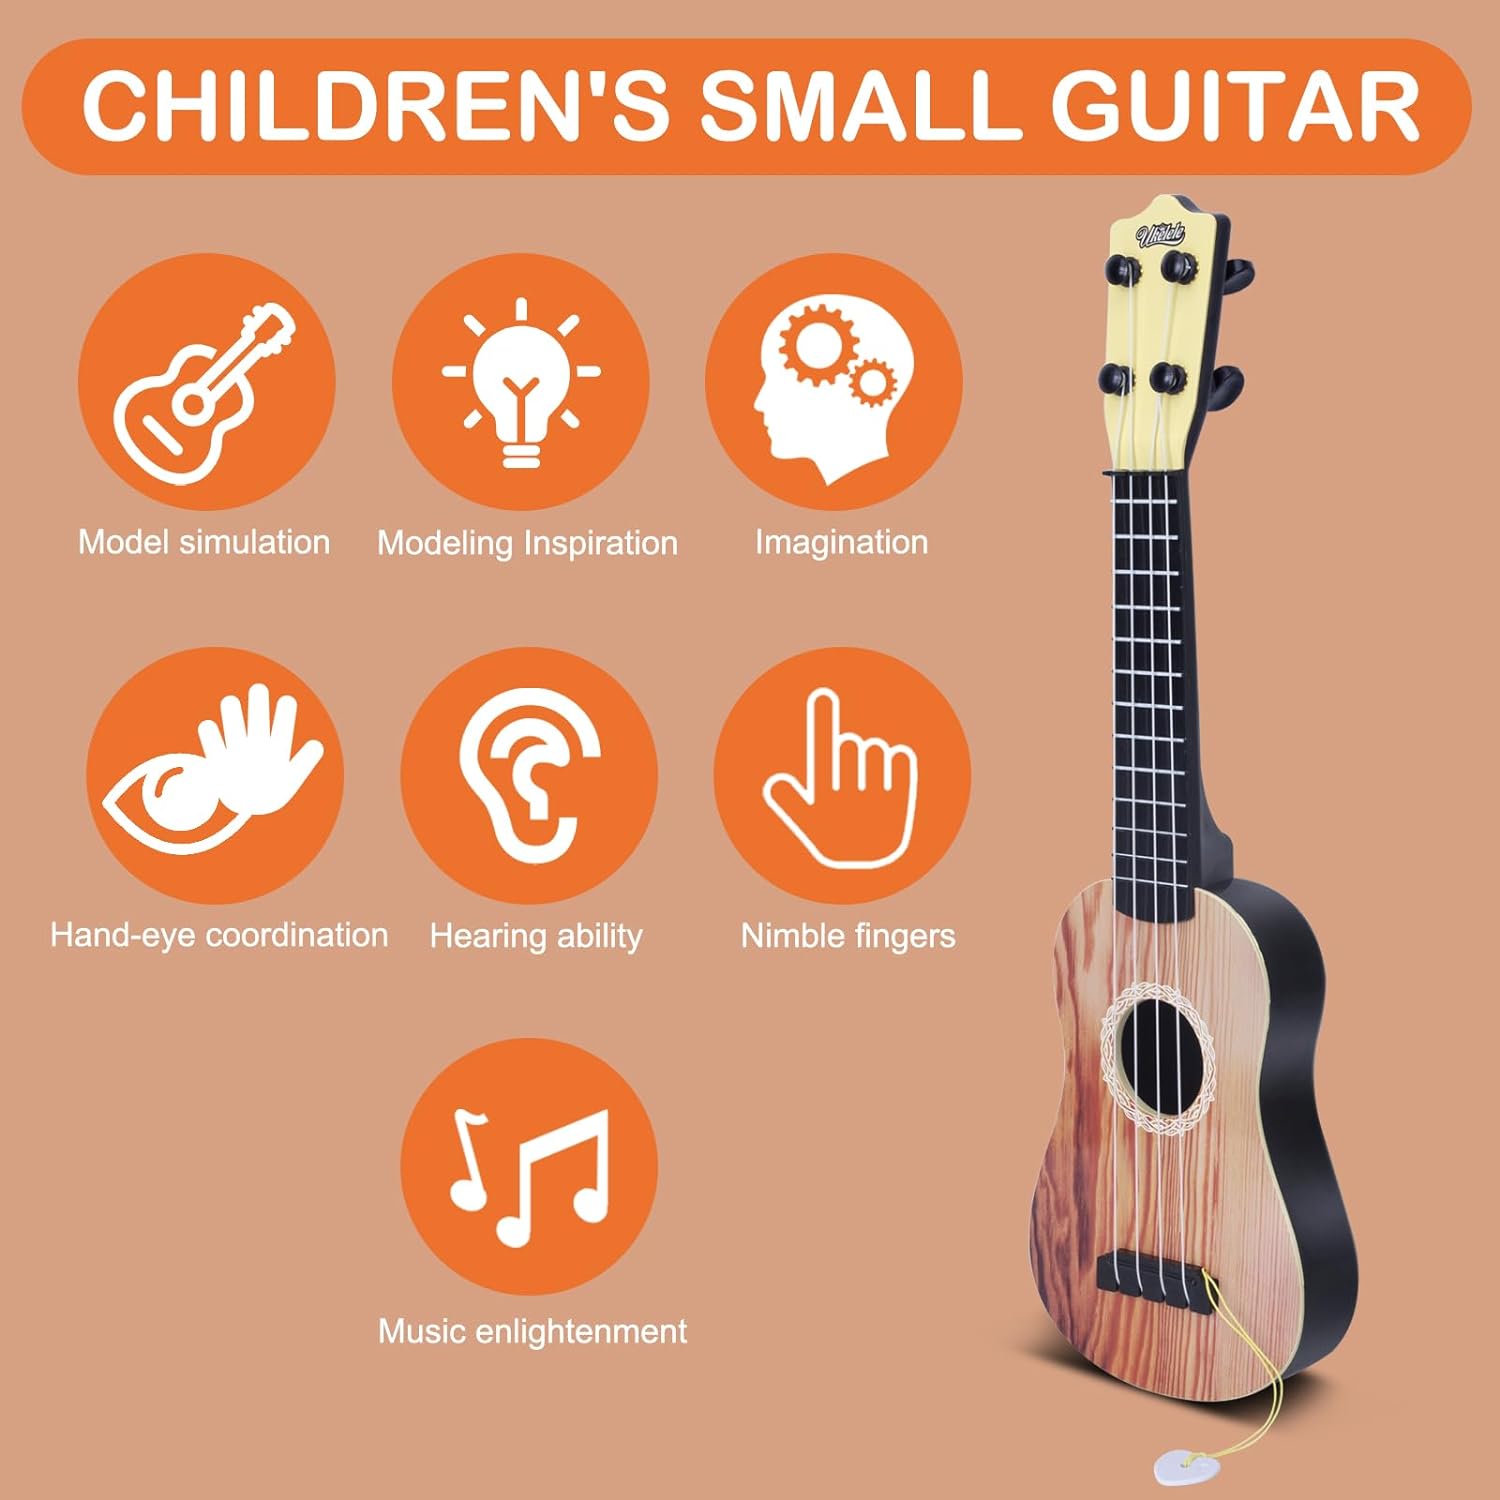 YOLOPLUS+ Kids Toy Ukulele, Kids Guitar Musical Toy,17 Inch 4 Steel Strings, with Pick, Kids Play Early Educational Learning Musical Instrument Gift for Preschool Childry (17 inch Brown Color)